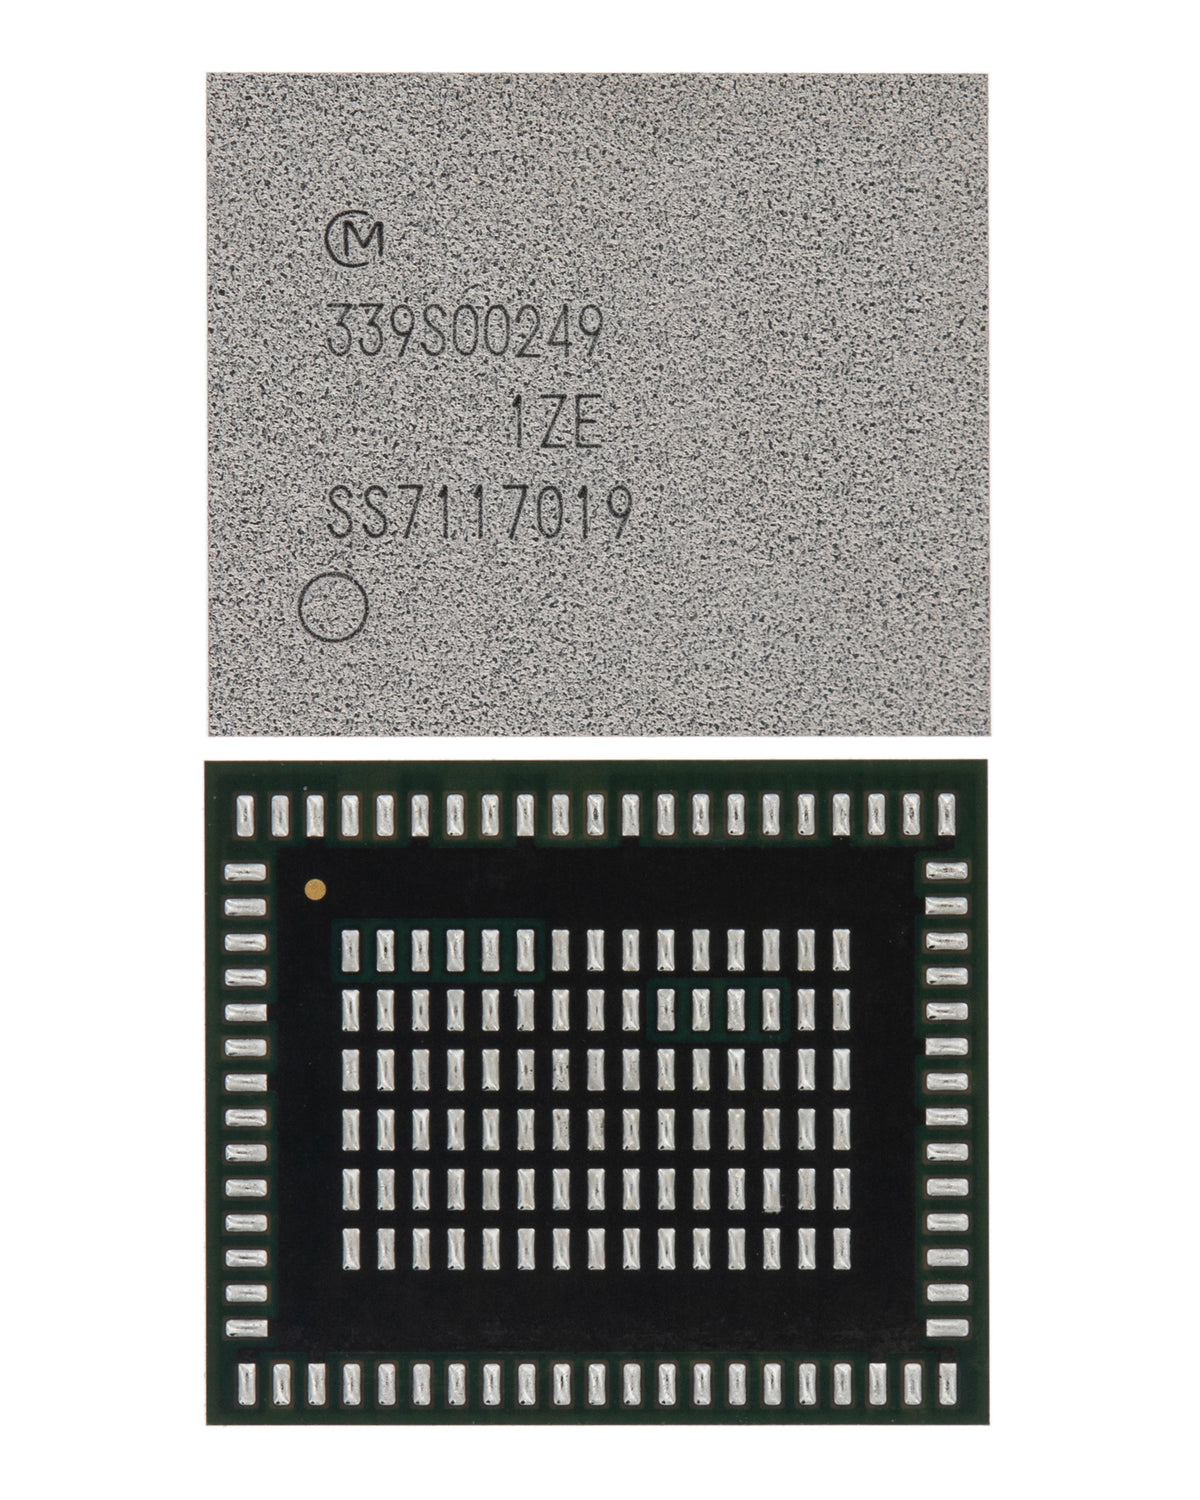 WIFI/BLUETOOTH IC CHIP FOR IPAD PRO 12.9" 2ND GEN (2017) (339S00249 / 339S00308)